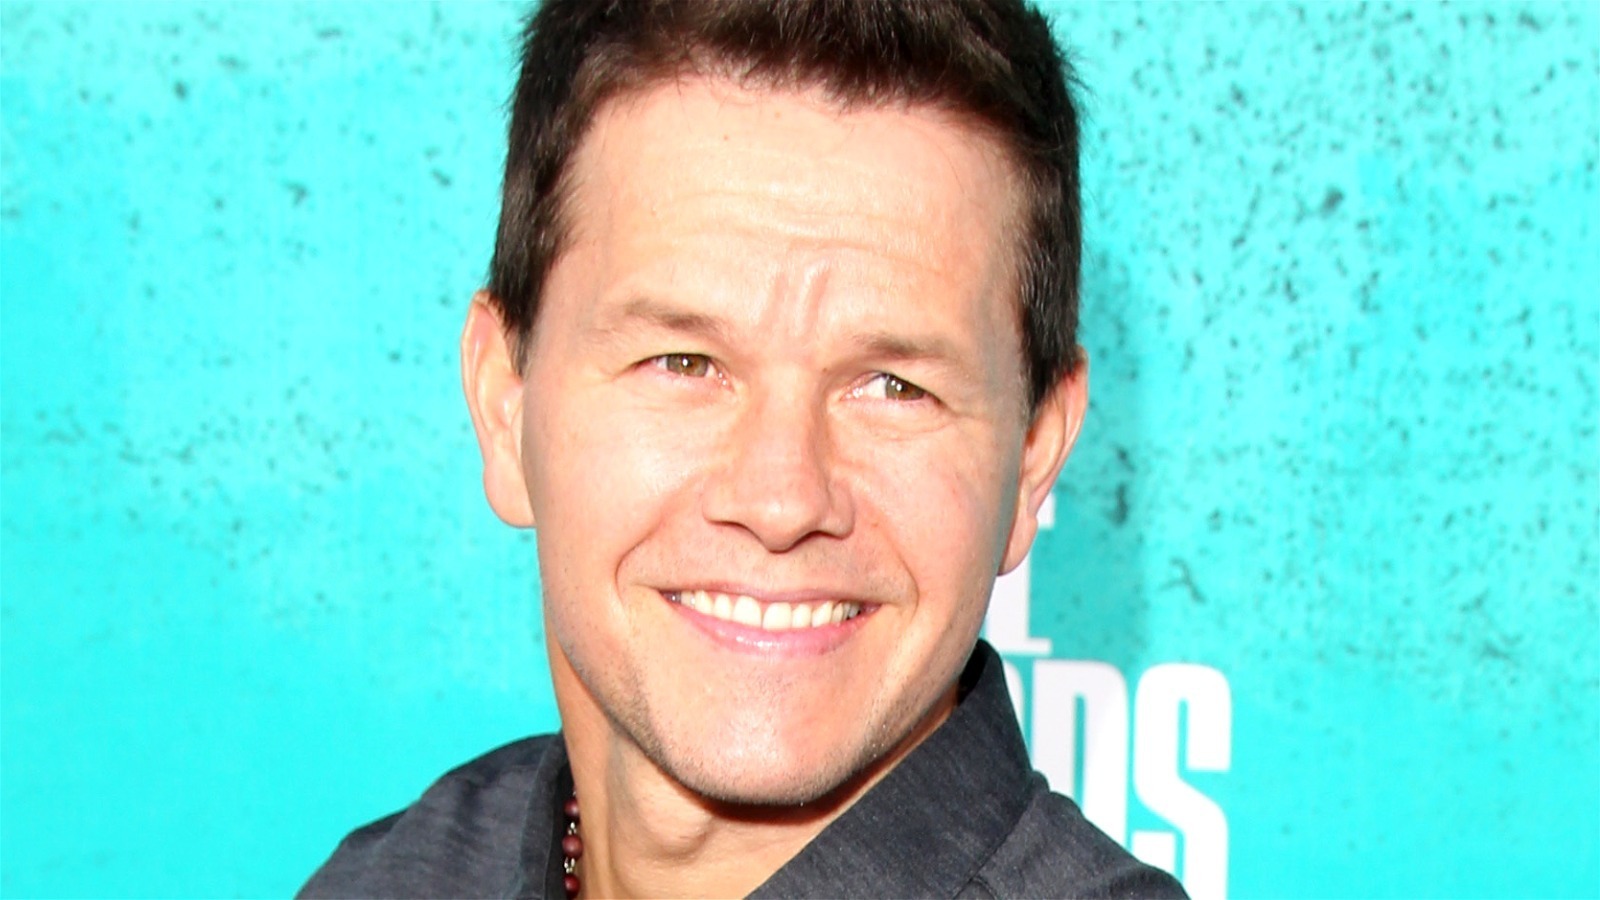 Mark Wahlberg's Highest-Grossing Movie Will Surprise You